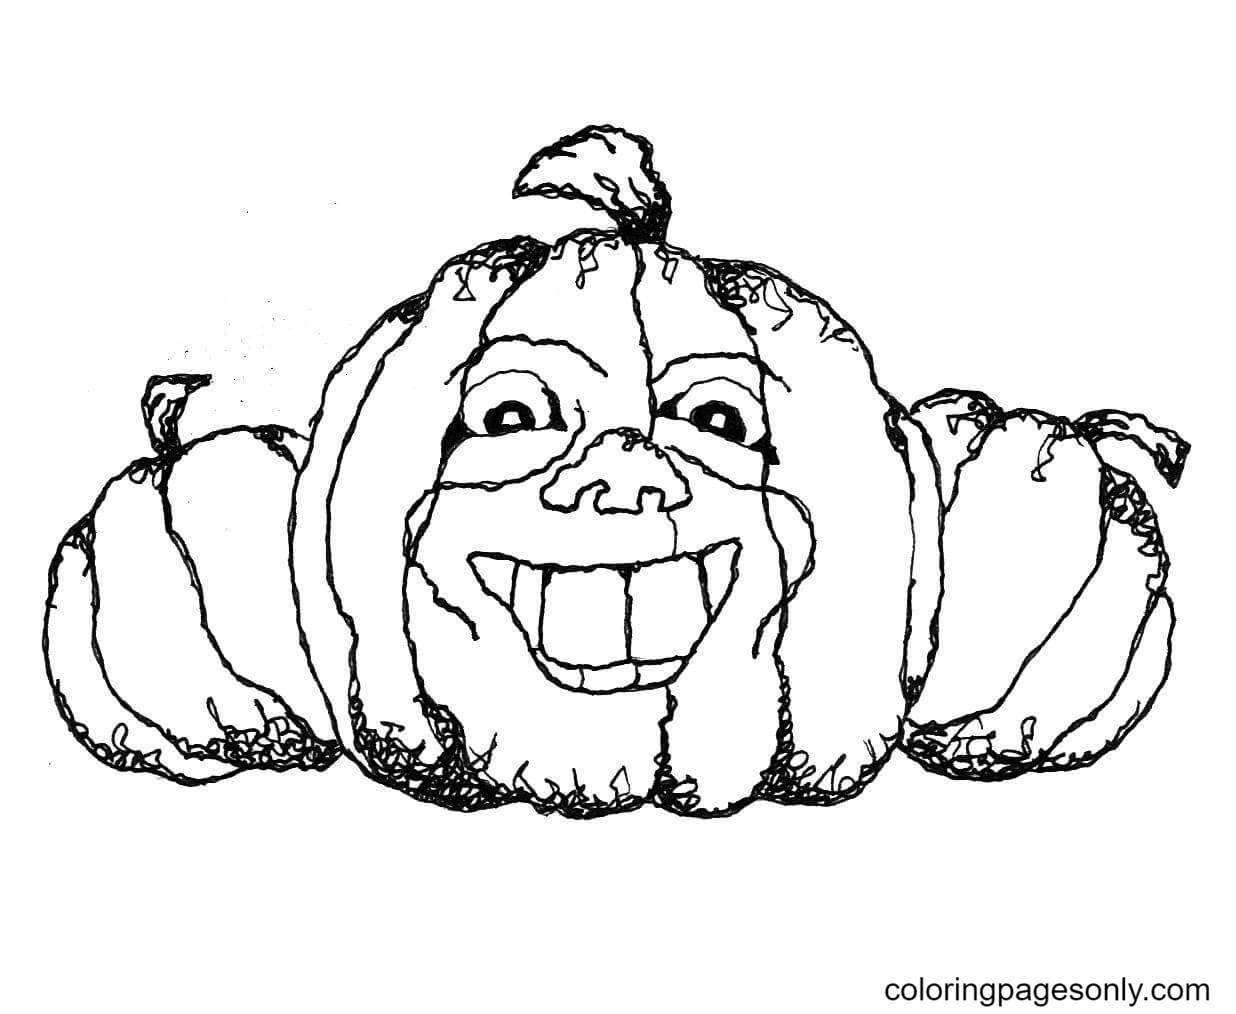 Funny Jack O’ Lantern Coloring Pages